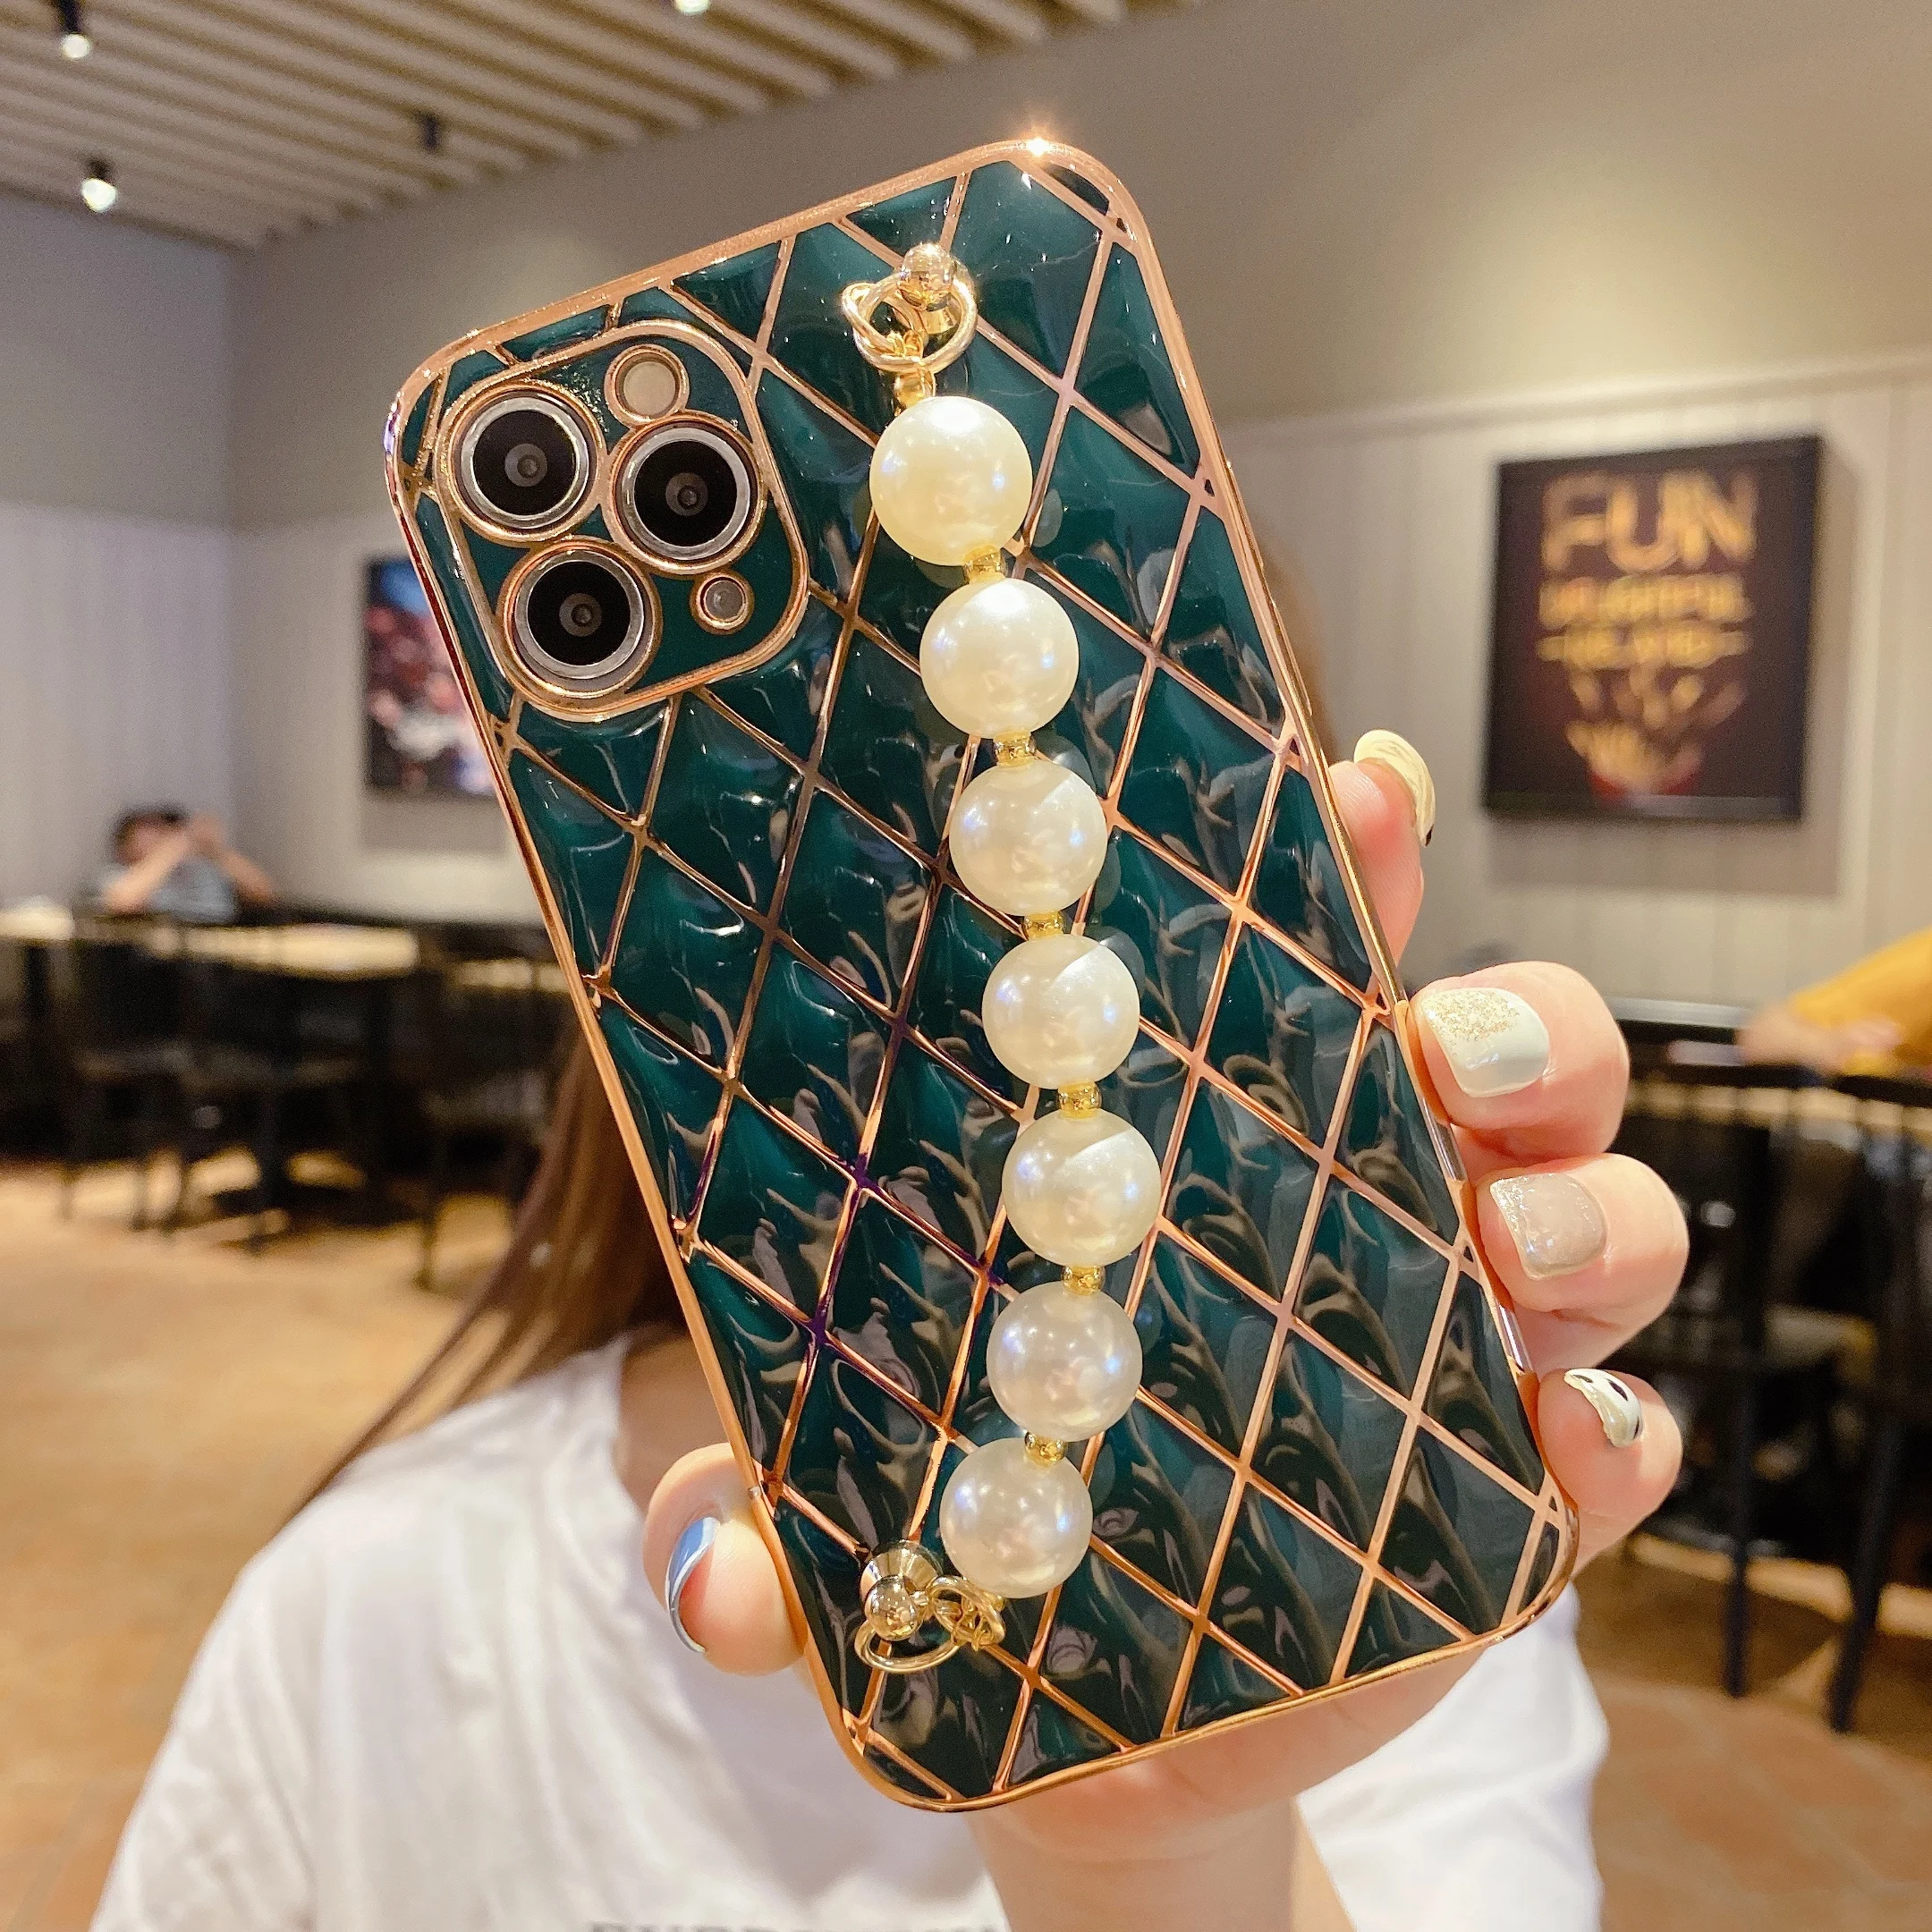 

2021 Newest Luxury Pearl Bracelet Silicone Cellphone Cover For Iphone 12 Mini 11 Pro Max X XS 7 8 Mobile Phone Funda Bags Case, Picture shows